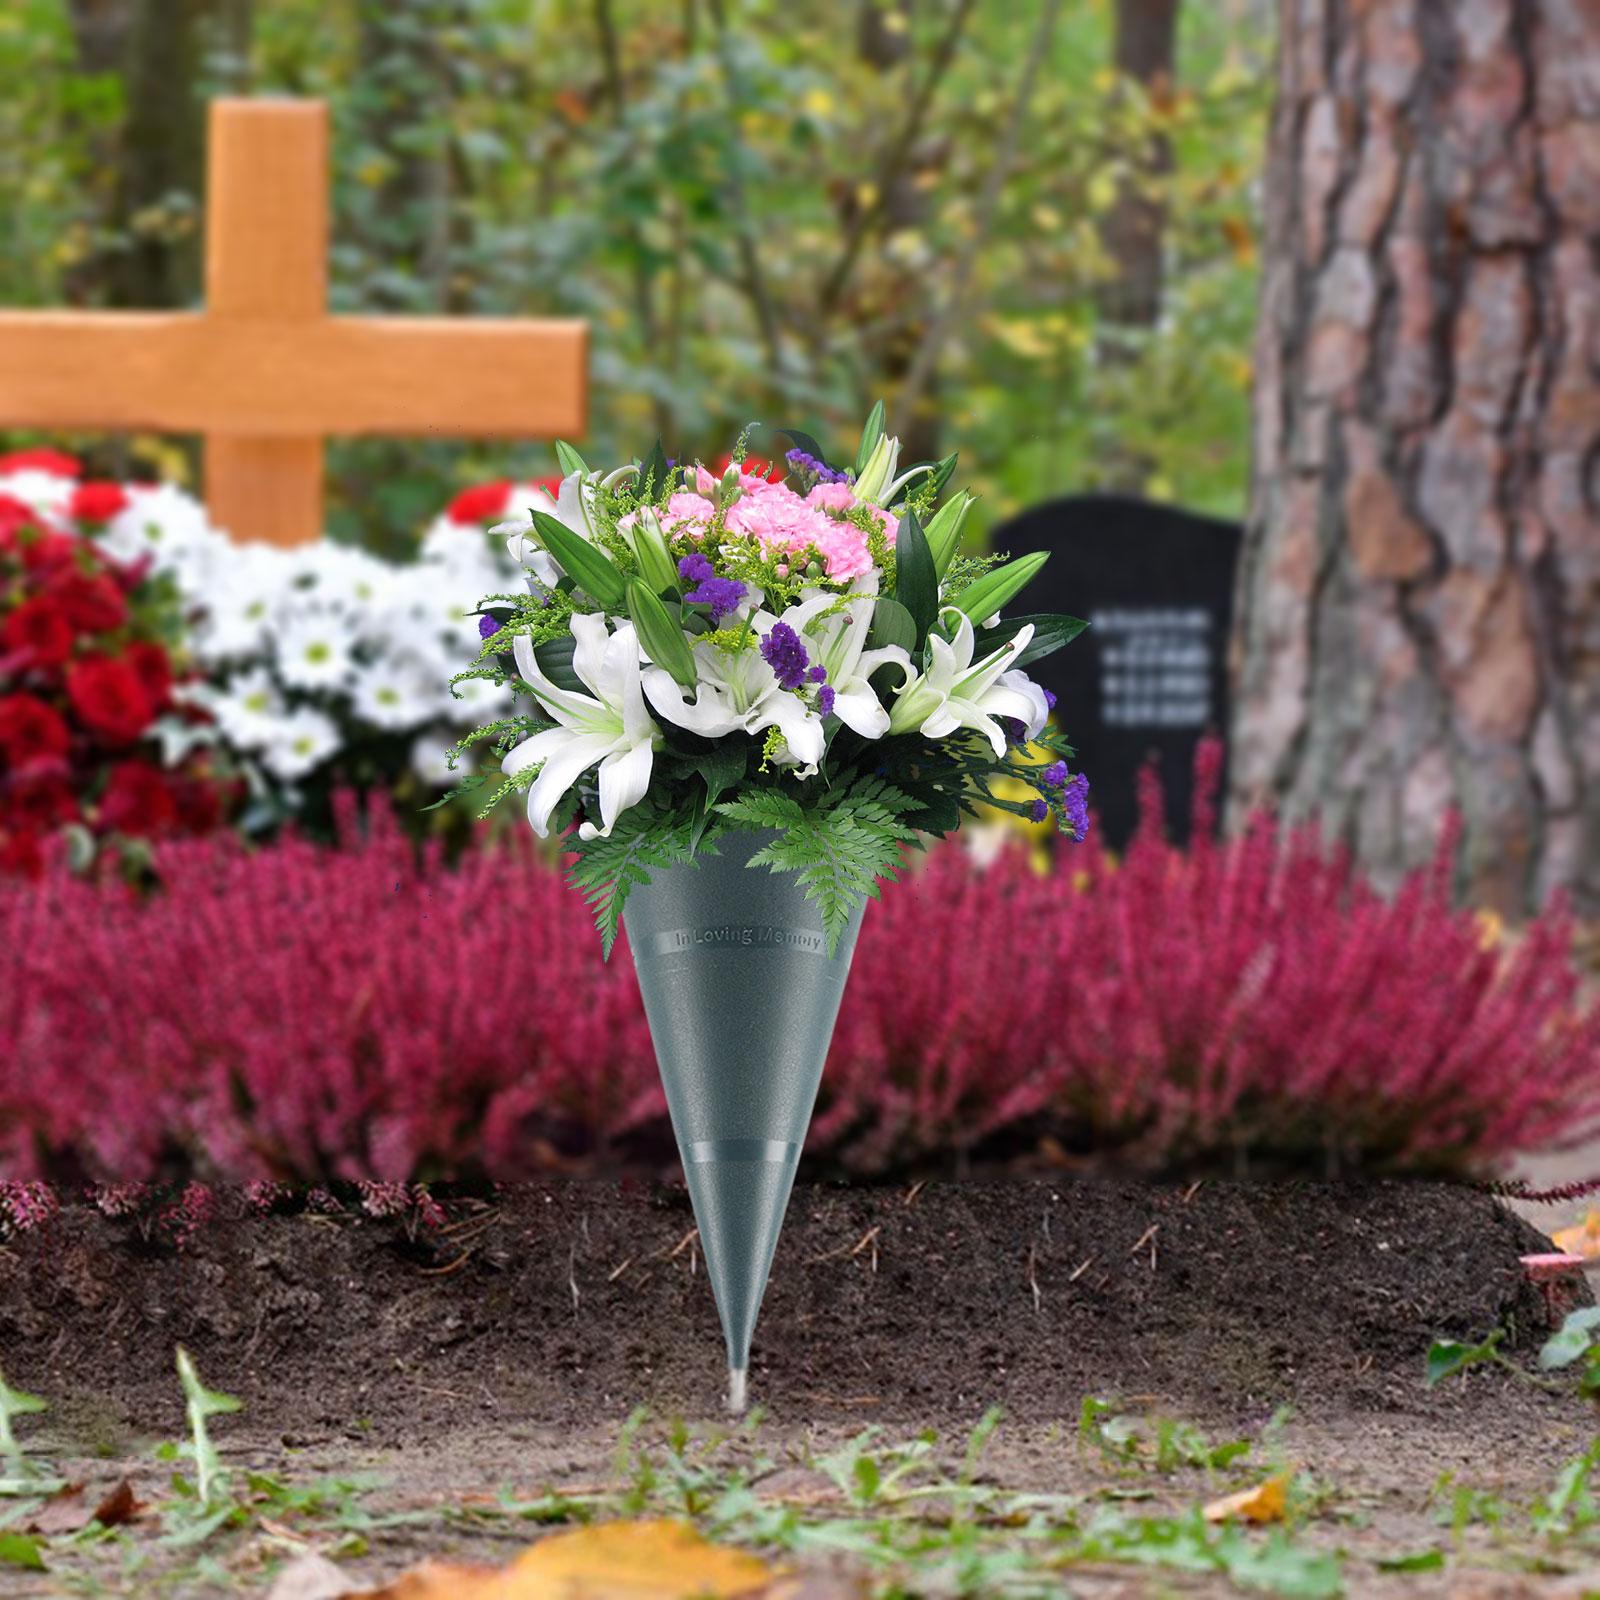 Multifunction Cone Cemetery Vase Art Vases for Cemetery Lawn Ornaments